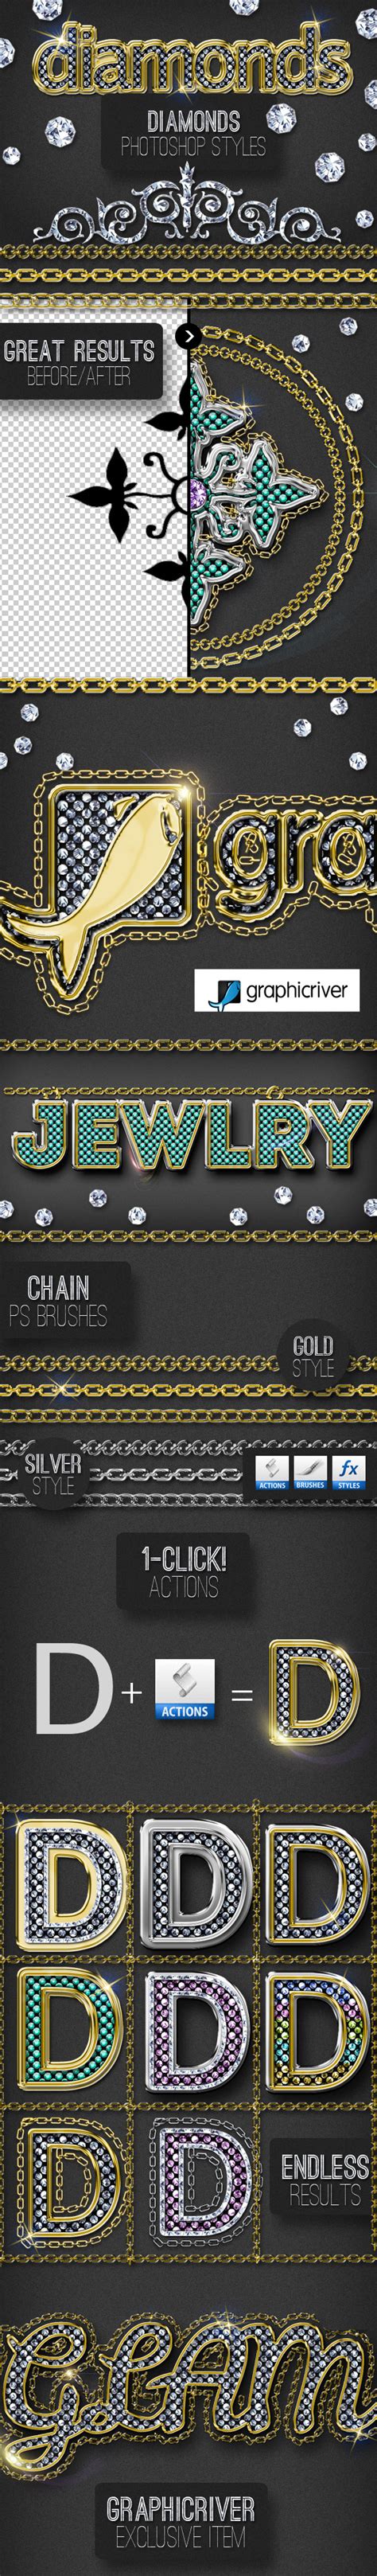 Get Bling Bling Diamond Photoshop Style Creator Graphicriver Gutemplates